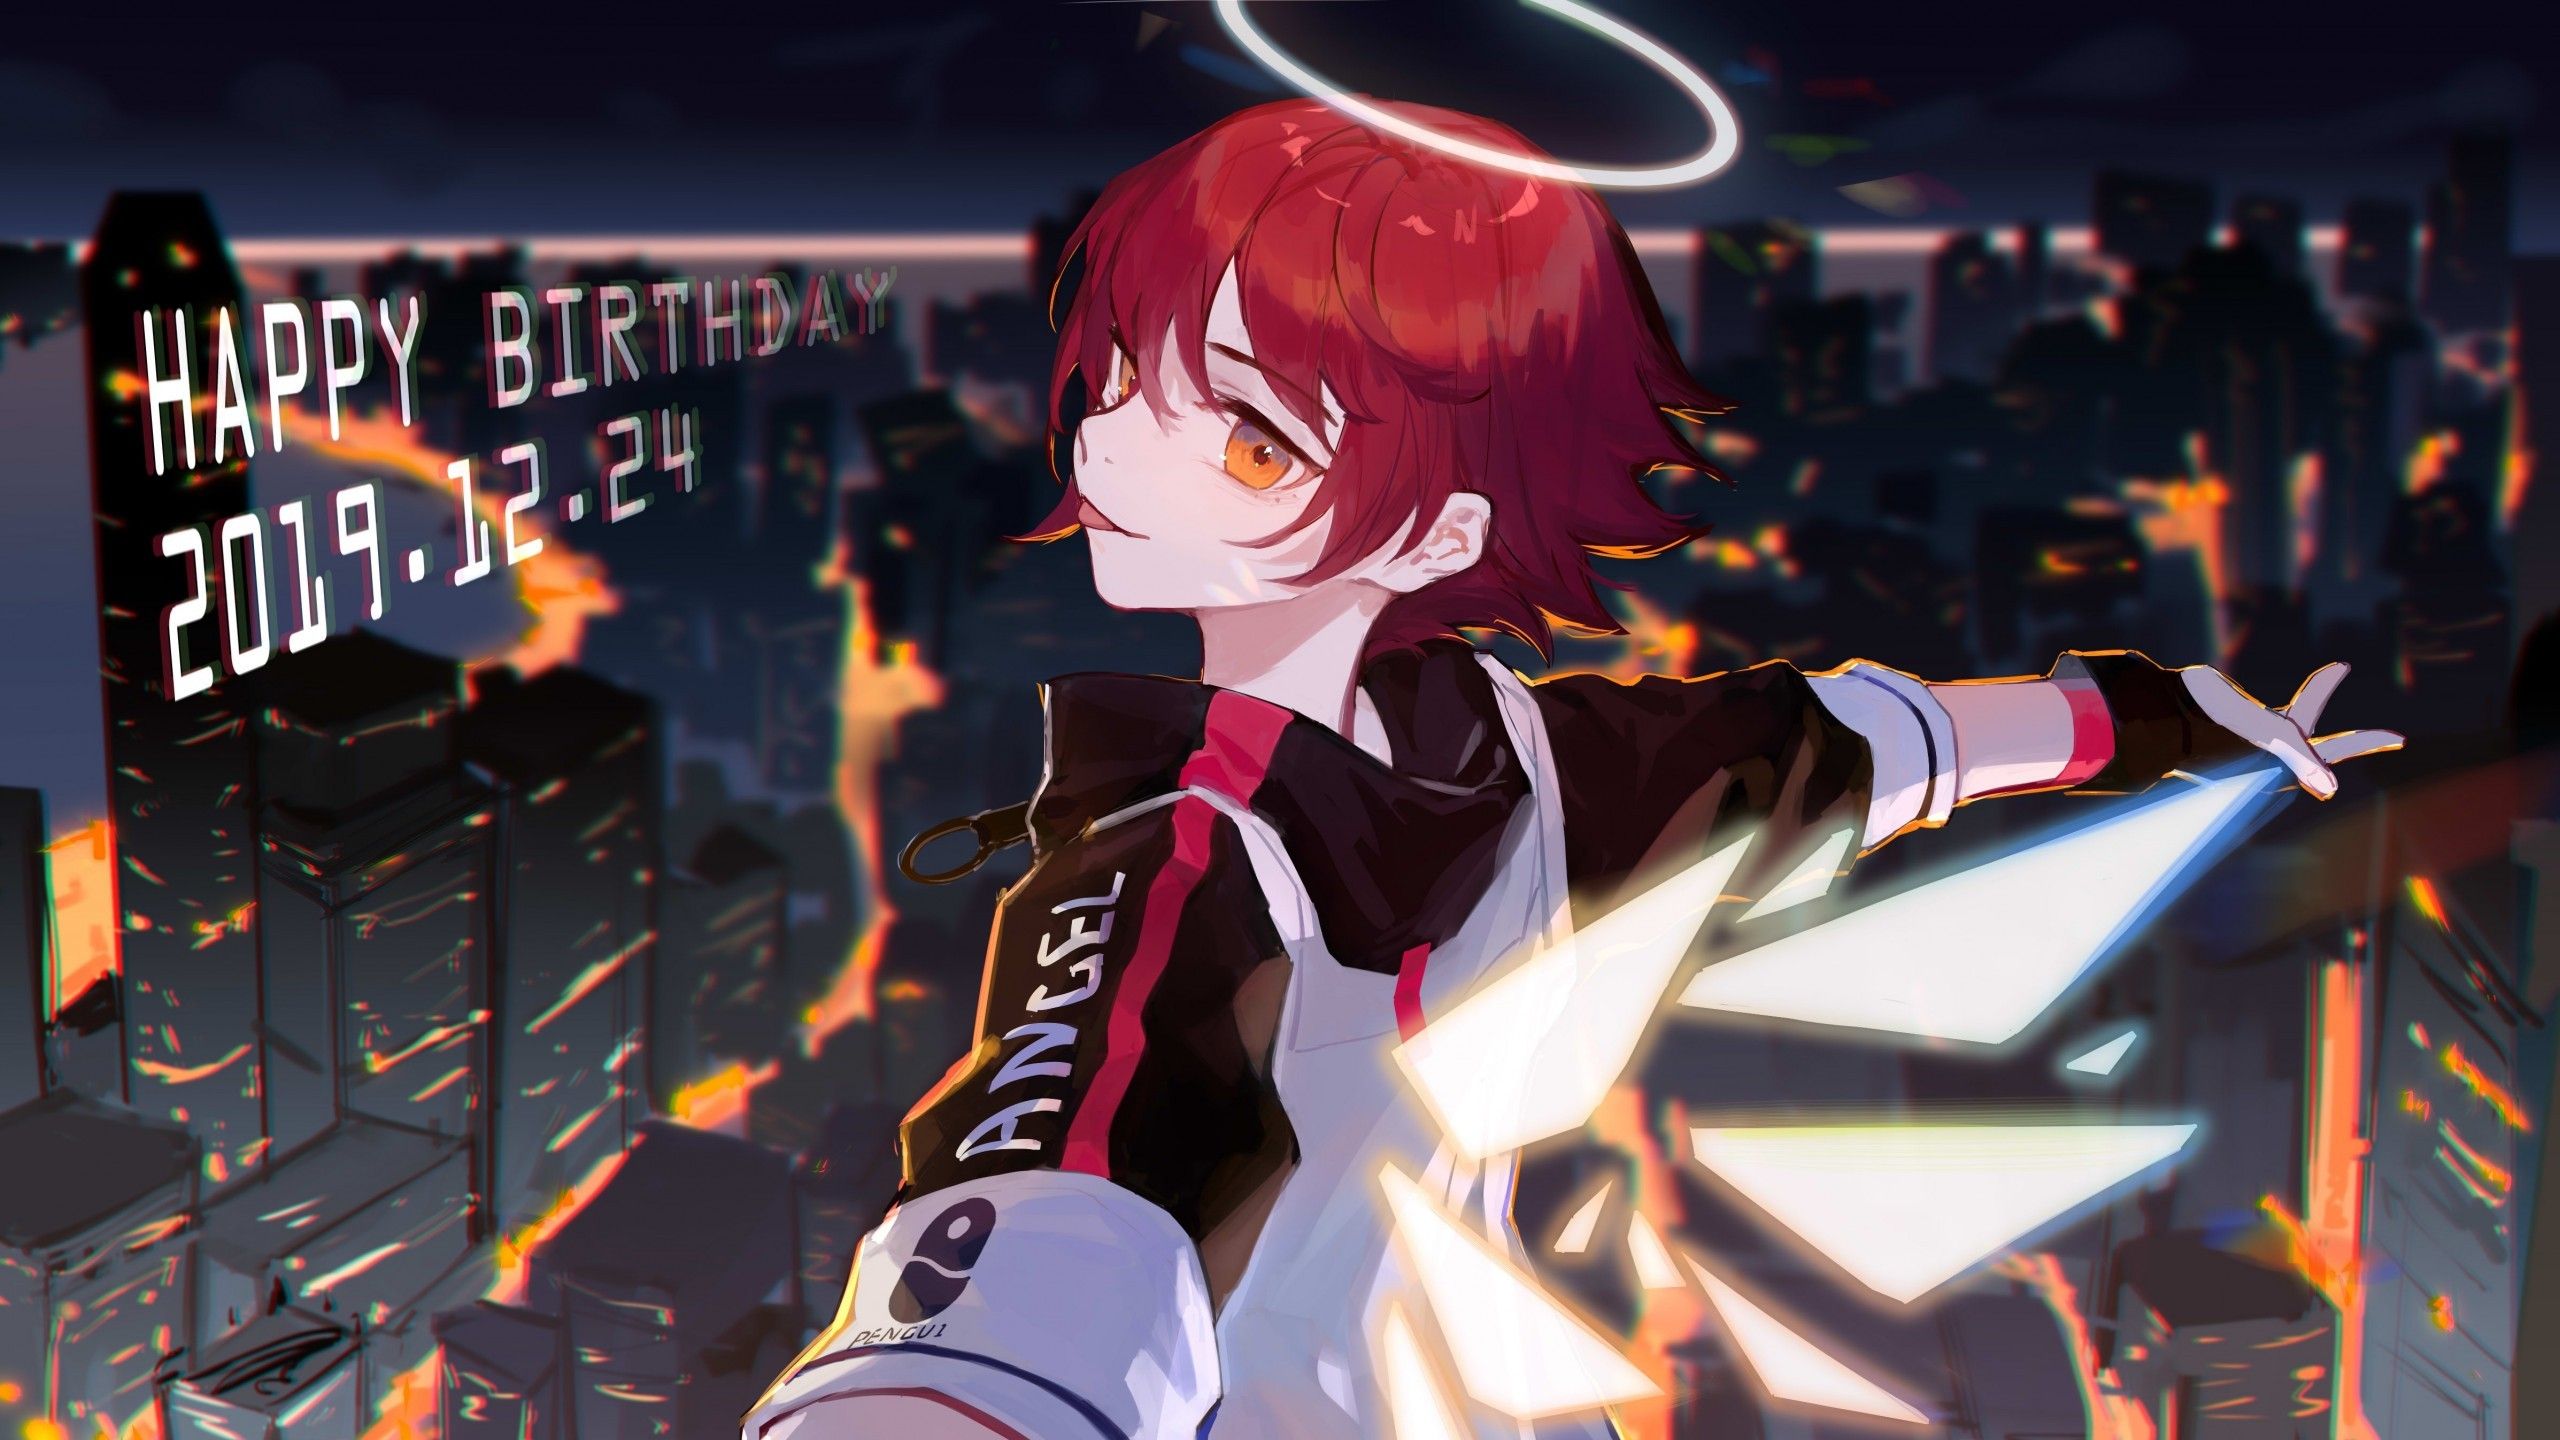 Download 2560x1440 Exusiai, Arknights, Redhead, Happy Birthday, Cityscape, Anime Games Wallpaper for iMac 27 inch